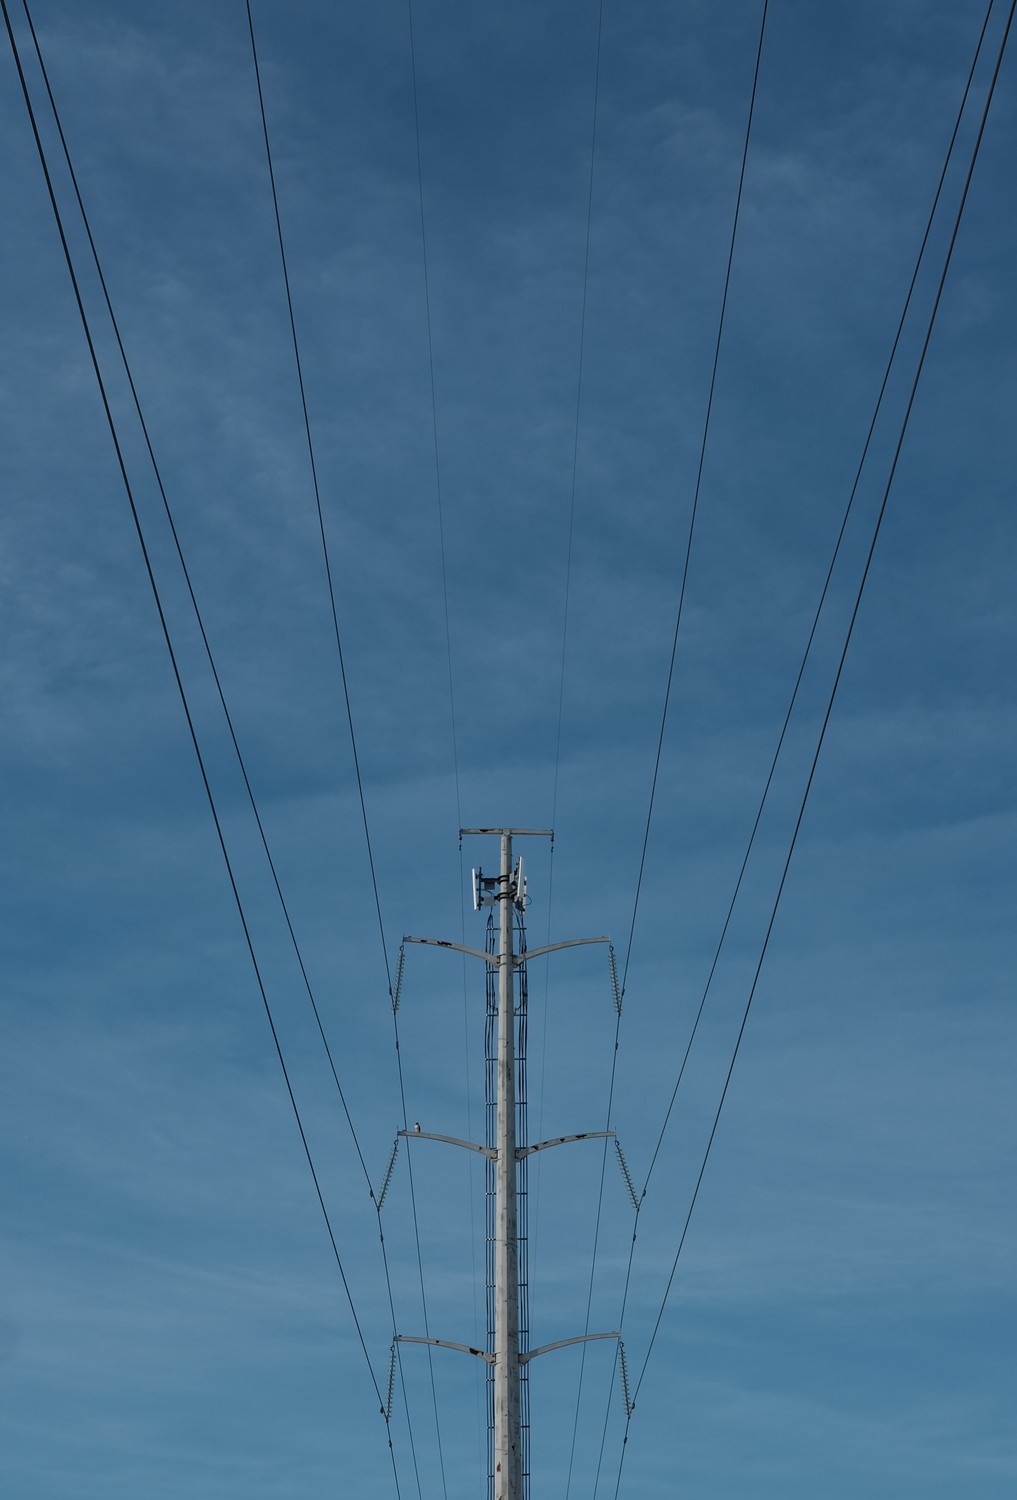 A symmetrical image of power lines and the tower supporting them